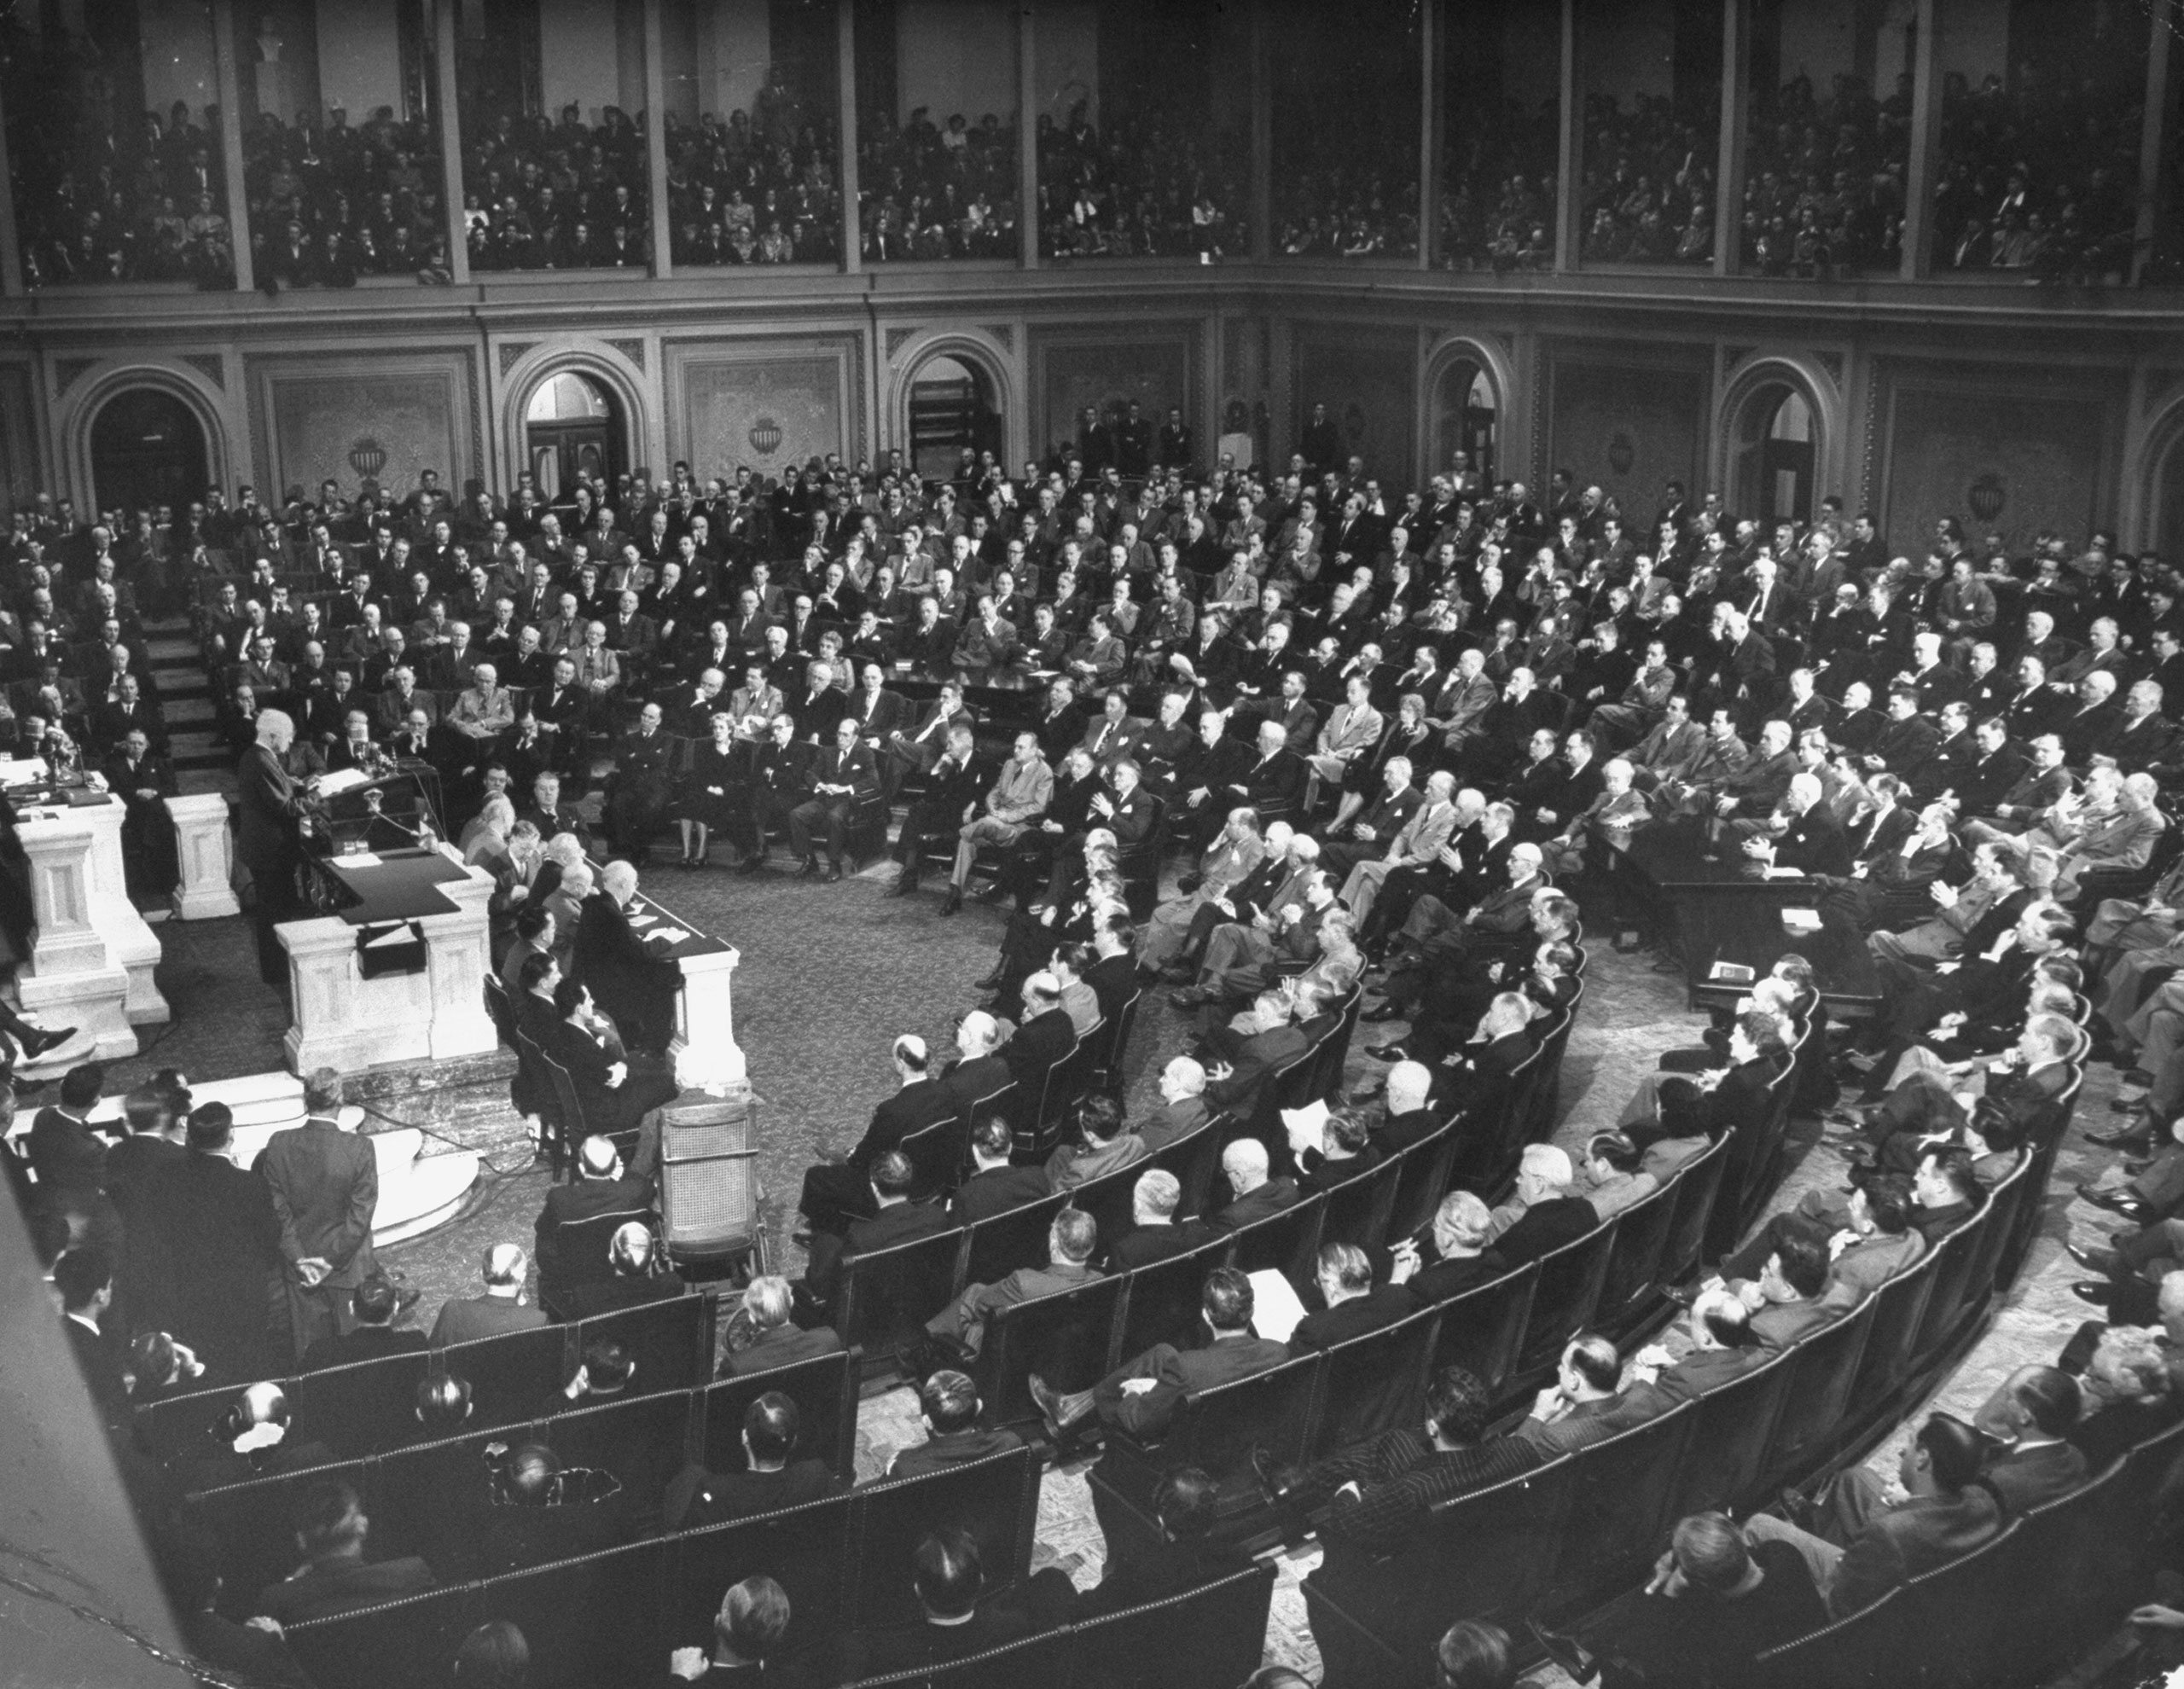 President Harry S. Truman delivering the State of the Union address in 1948. (Frank Scherschel—The LIFE Picture Collection/Getty Images)